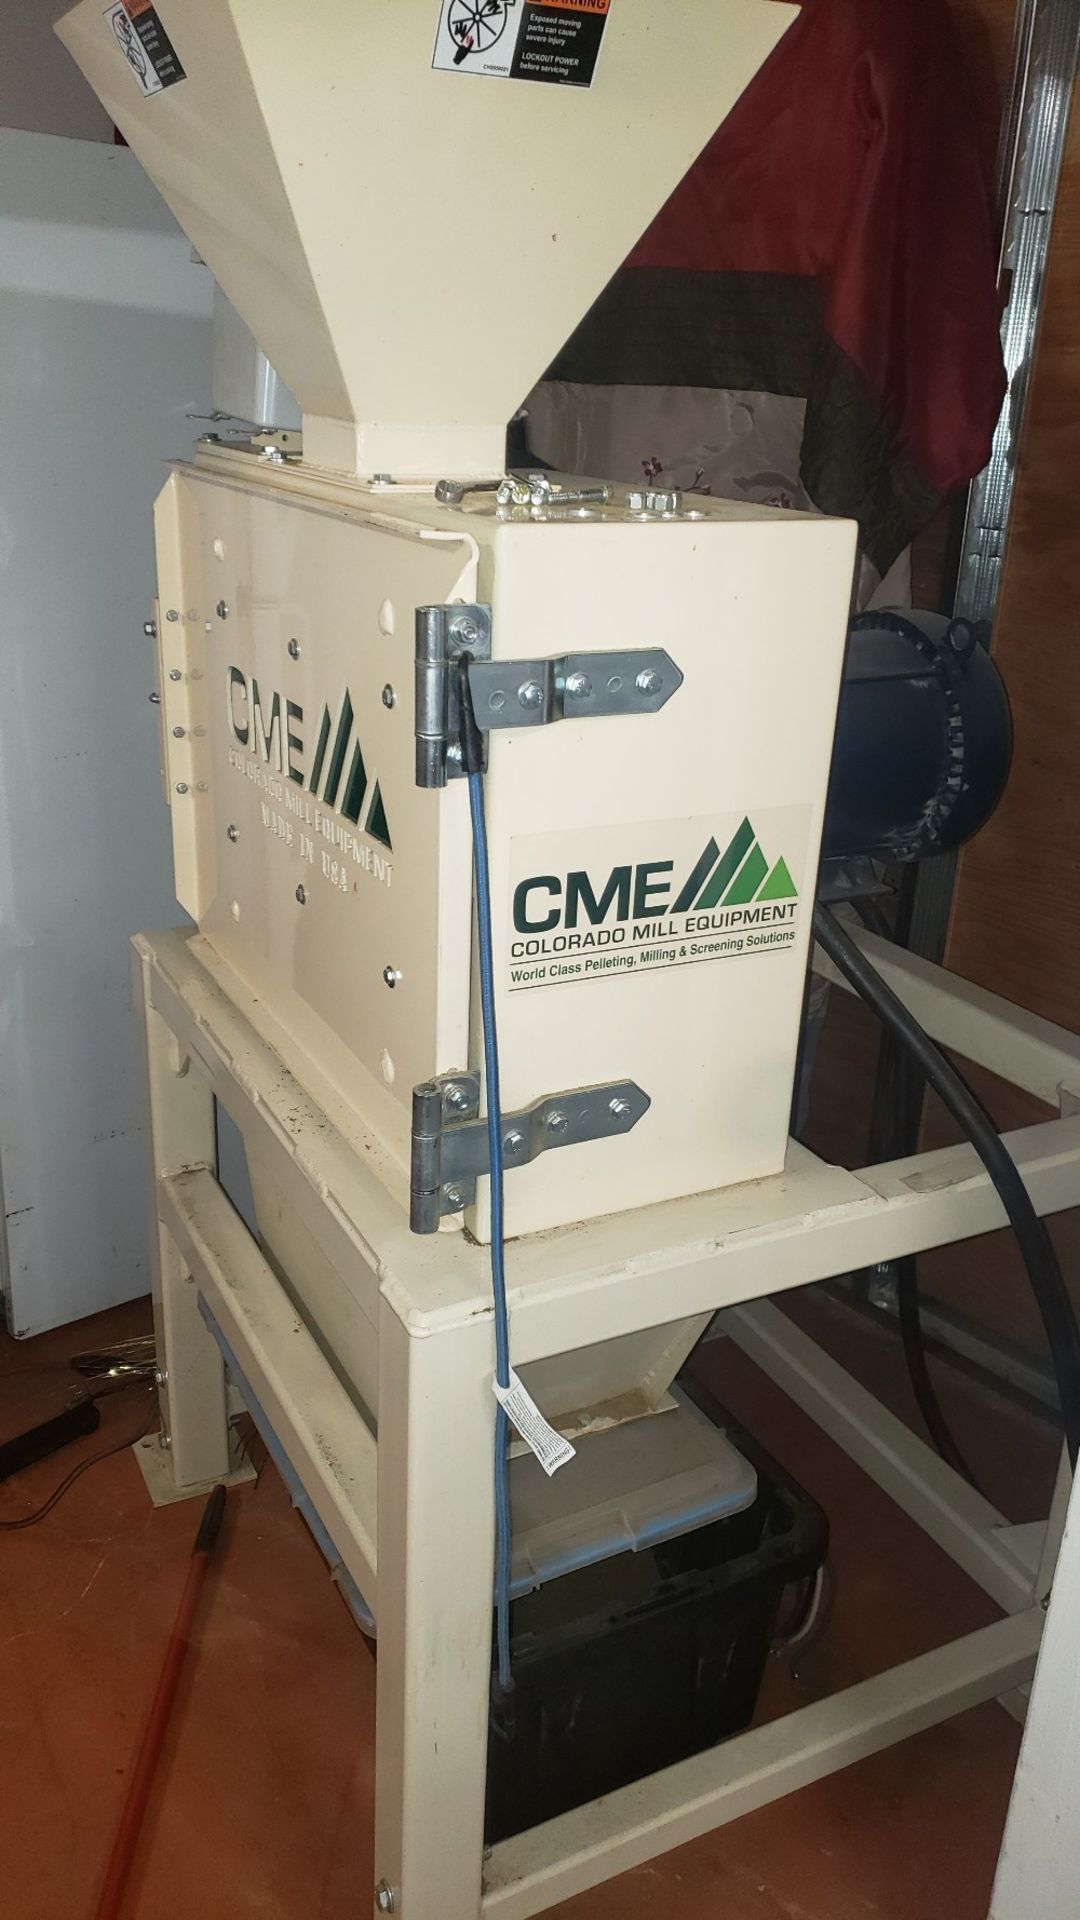 CME Hammer-Mill, model HNS-VB-HT-10, 10hp, grinds up to 7 tons of corn per hour with 3/16"